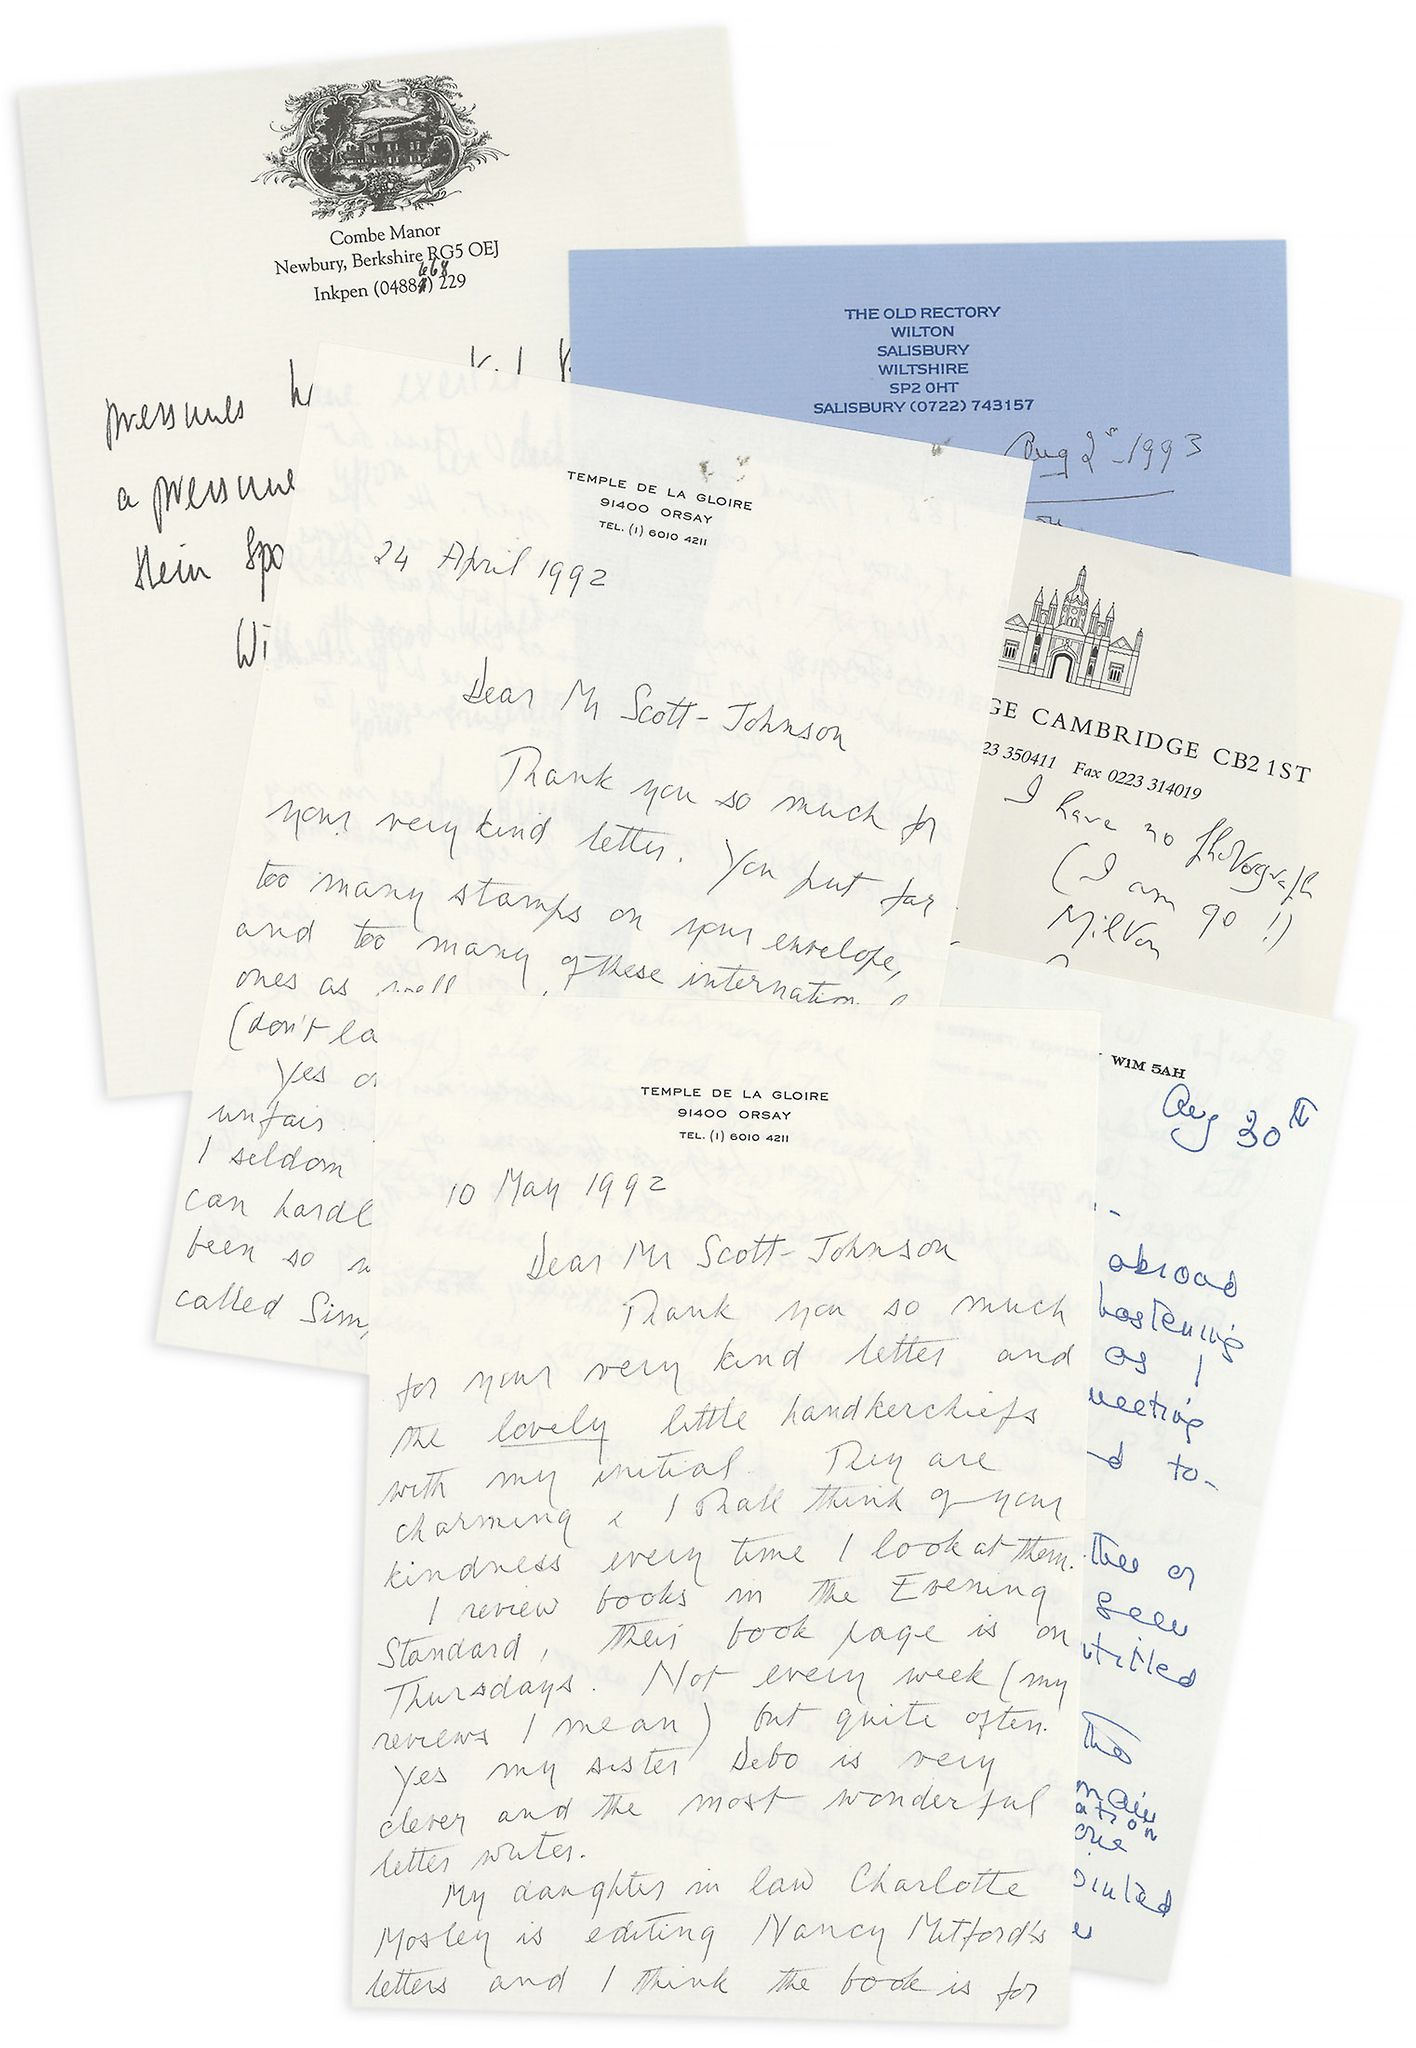 COLLECTION OF LETTERS - INCL. DIANA MOSLEY - Collection of autographed letters and cards from